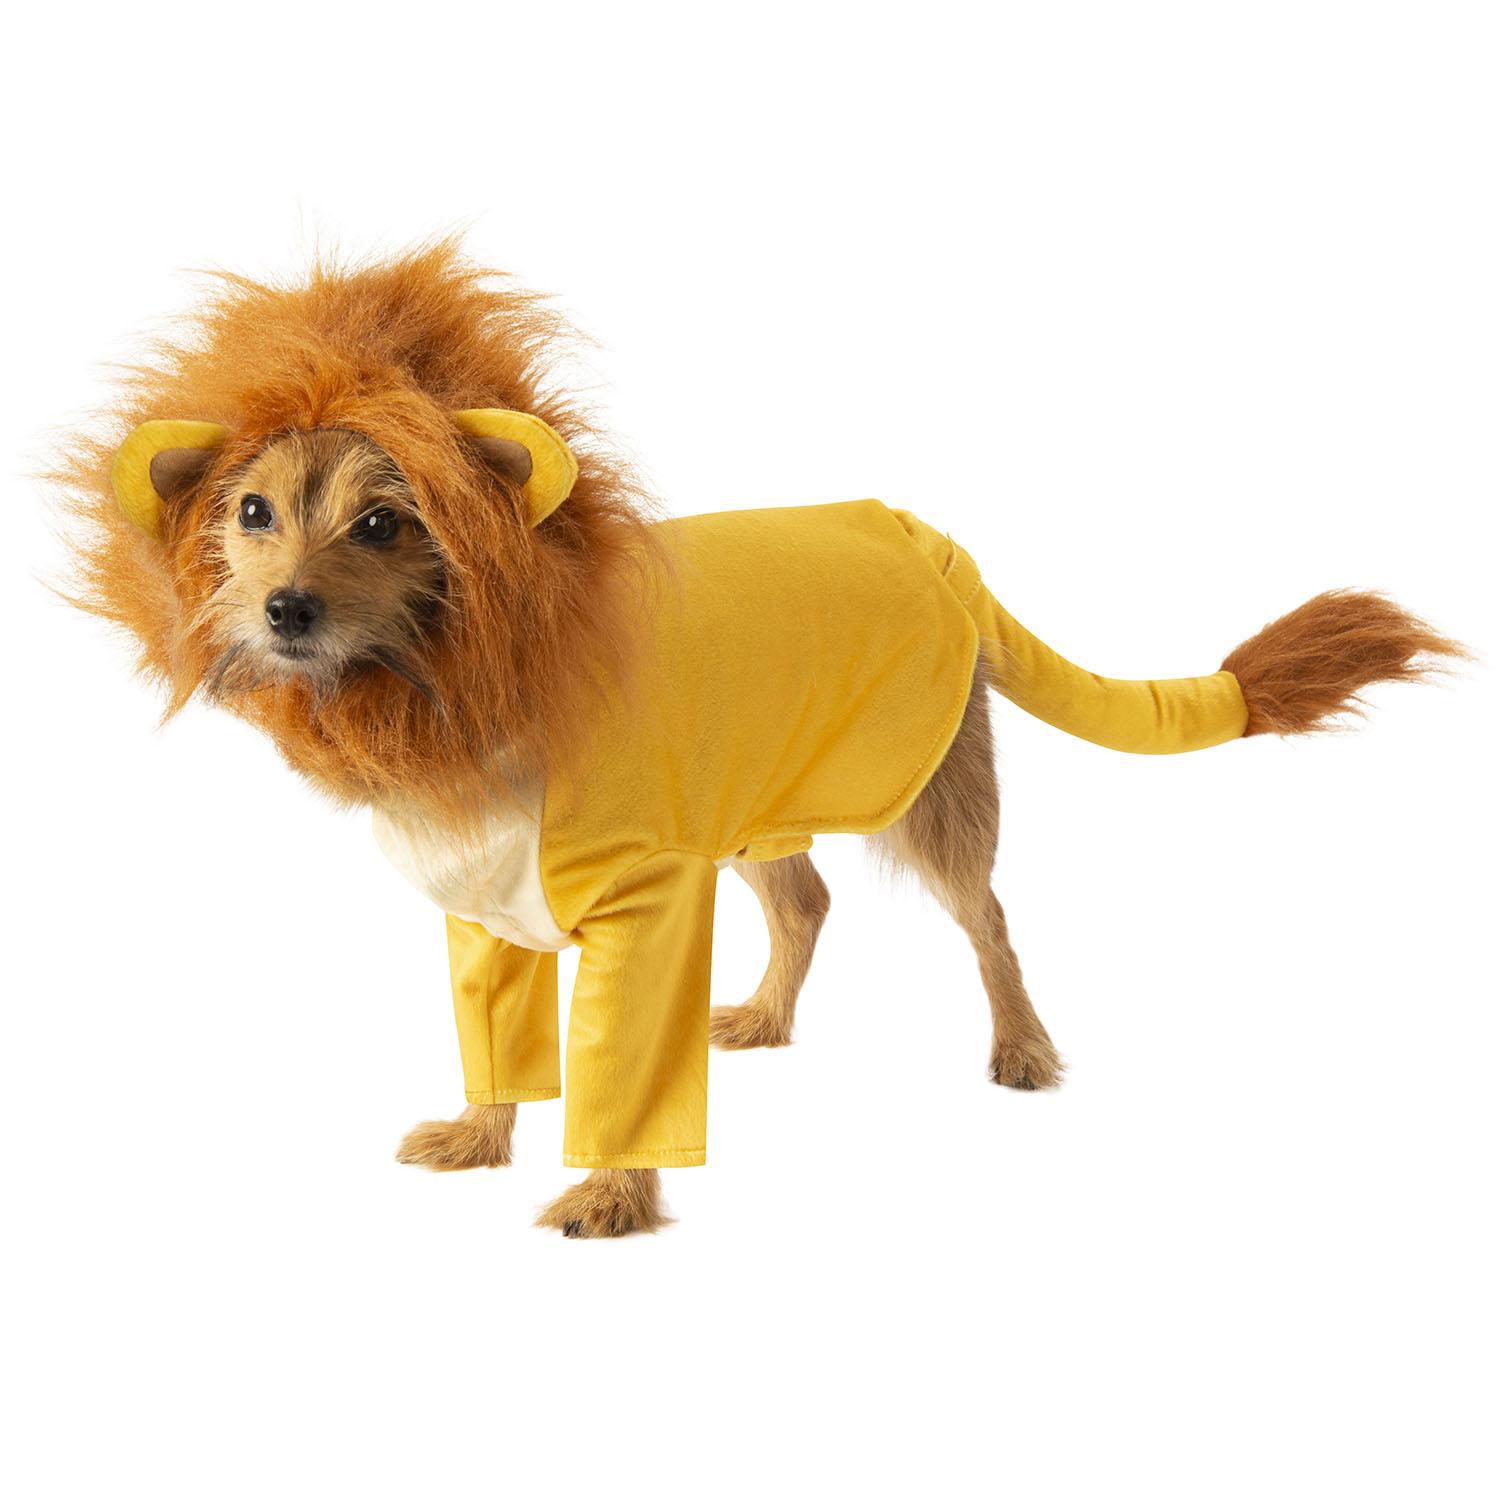 The Lion King Simba Dog Costume by Rubie's